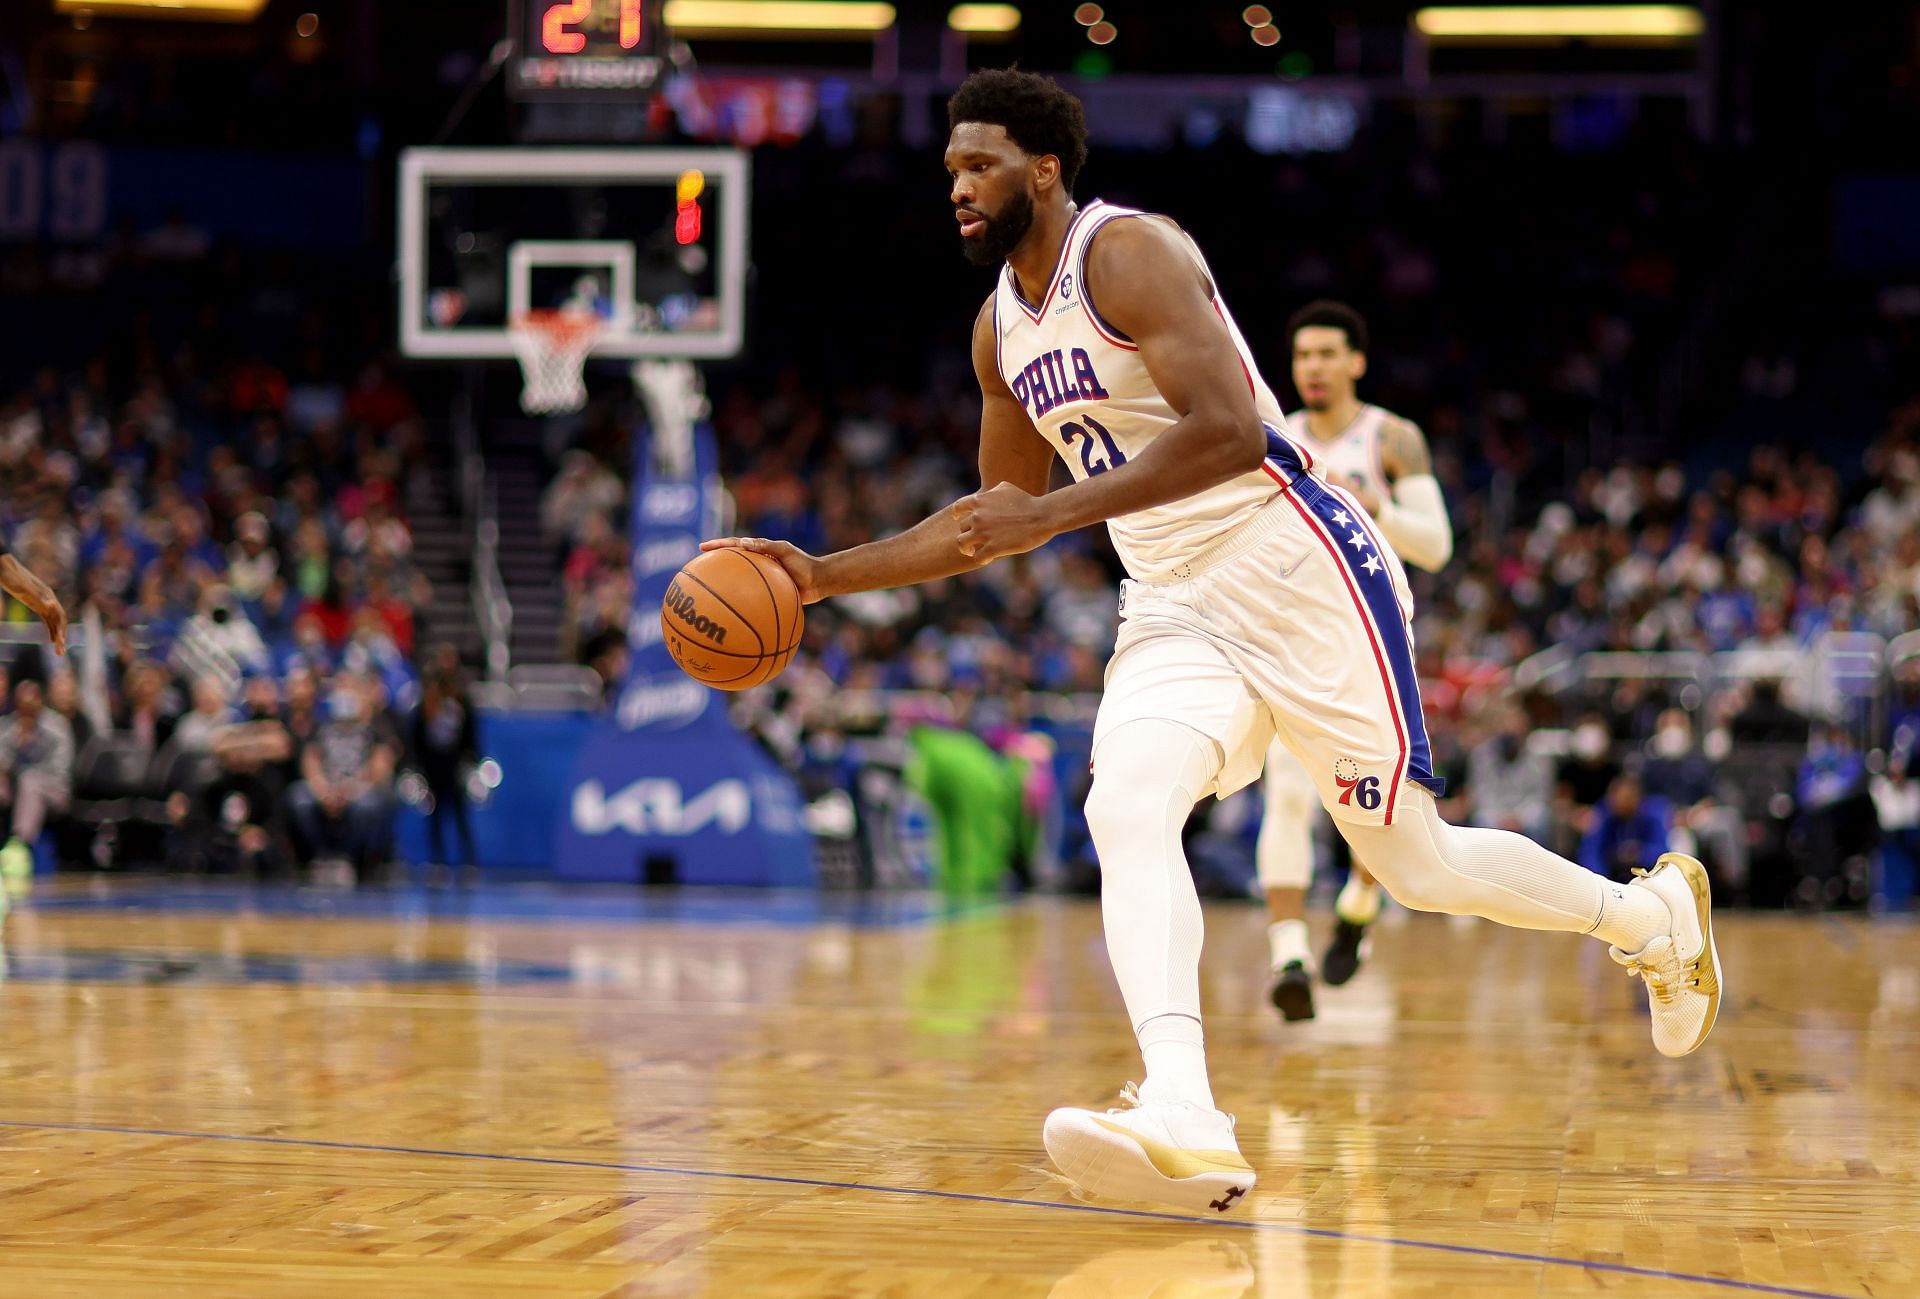 Joel Embiid #21 of the Philadelphia 76ers drives into the basket during a game against the Orlando Magic at Amway Center on January 5, 2022 in Orlando, Florida